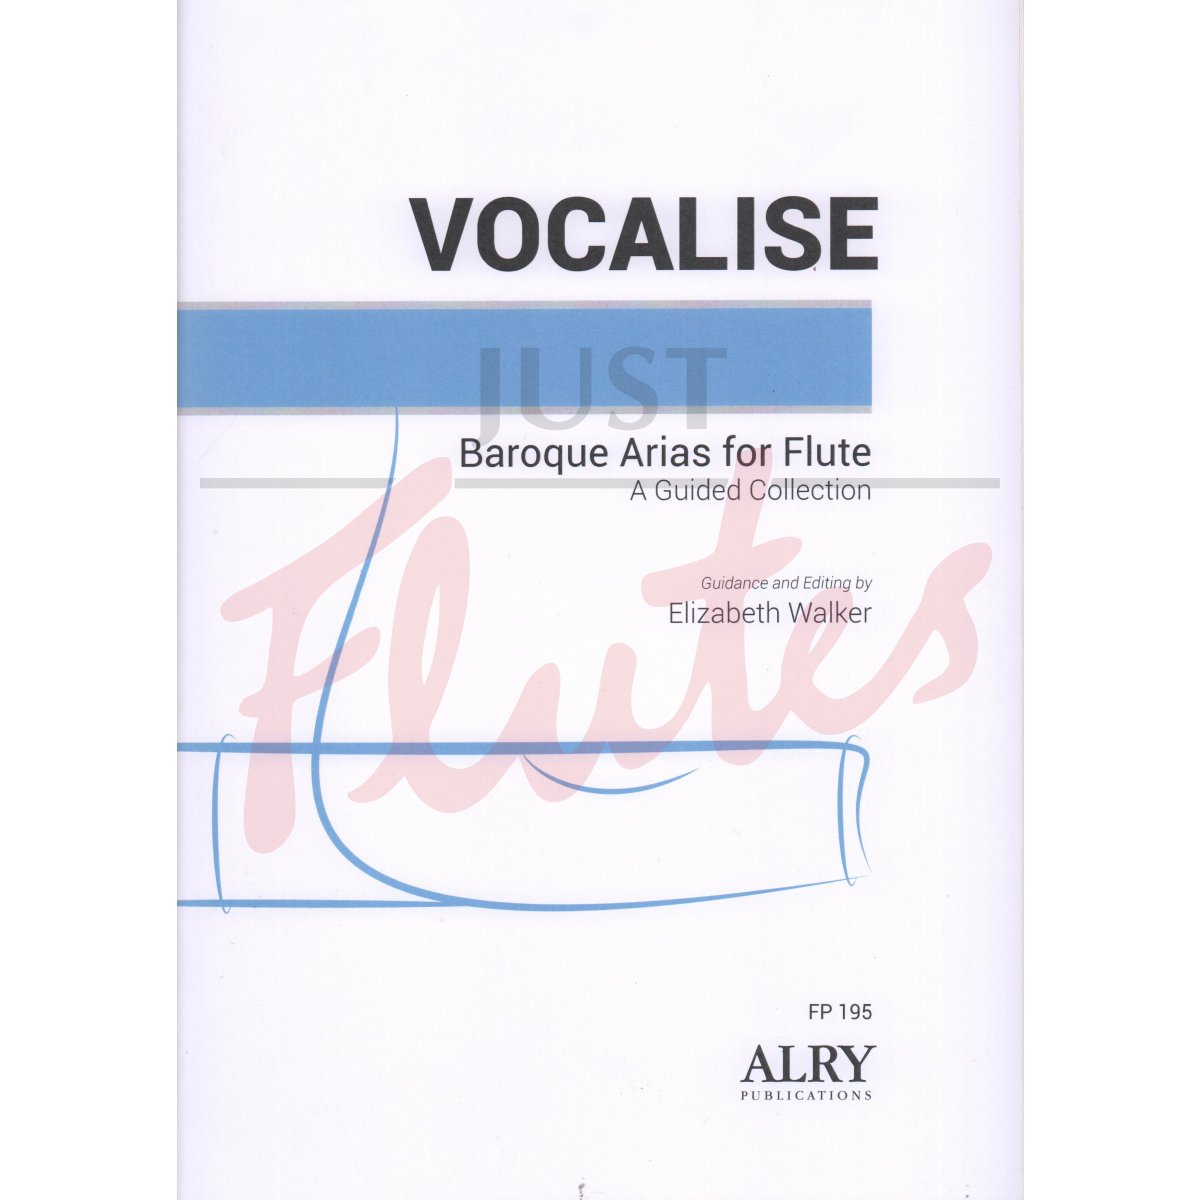 Vocalise: Baroque Arias for Flute, A Guided Collection